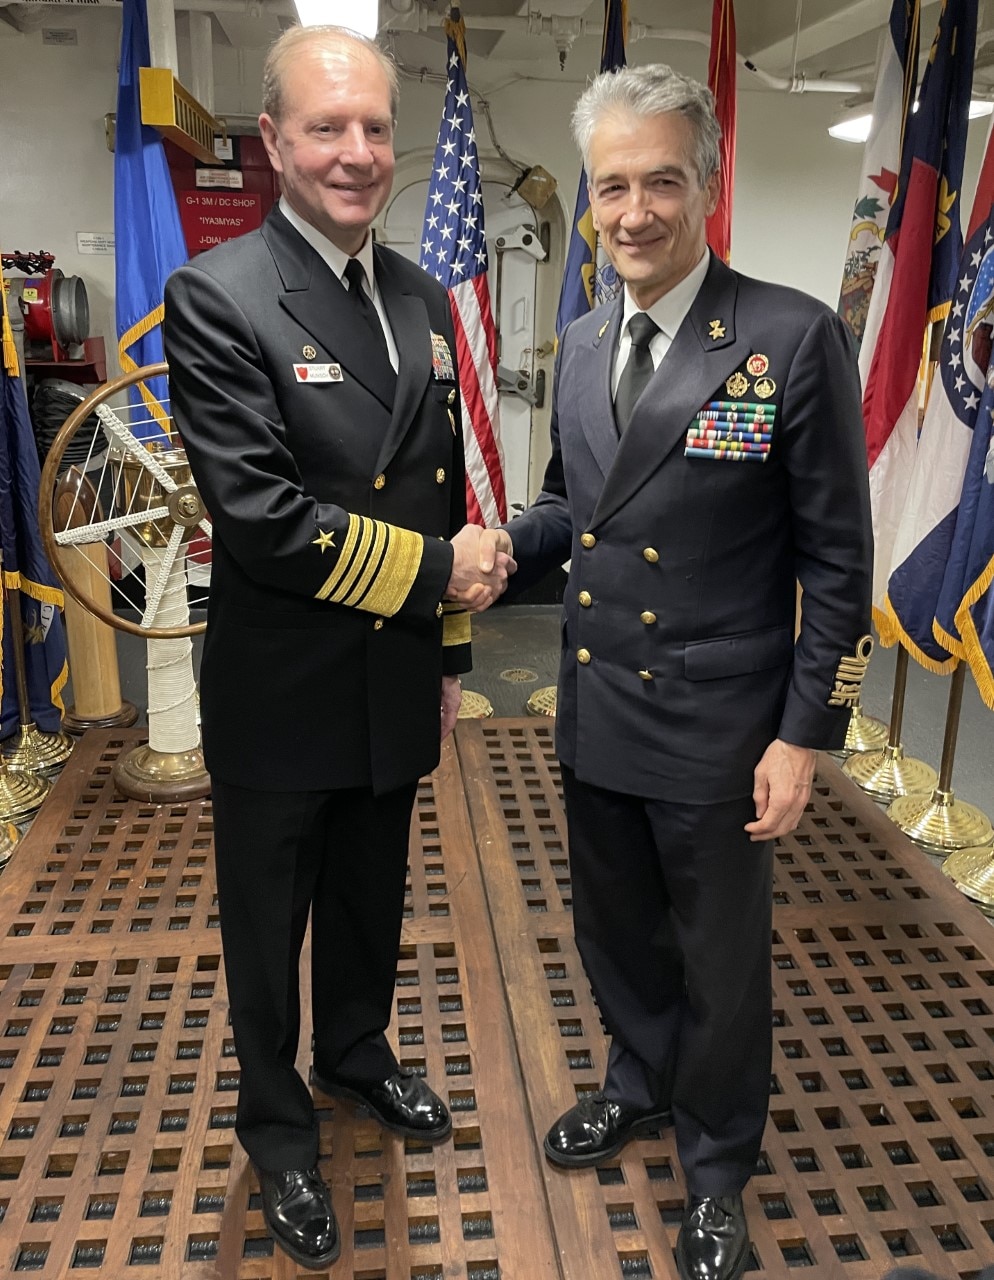 Adm. Stuart Munsch, Commander, U.S. Naval Forces Europe-Africa, left, poses for a photo with Italian Head of Navy Adm. Enrico Credendino, right, after a reception for local military and civilian leaders, honoring the U.S.–Italian relationship aboard the Nimitz-class aircraft carrier USS George H.W. Bush (CVN 77) during a scheduled port visit, Nov. 29, 2022.